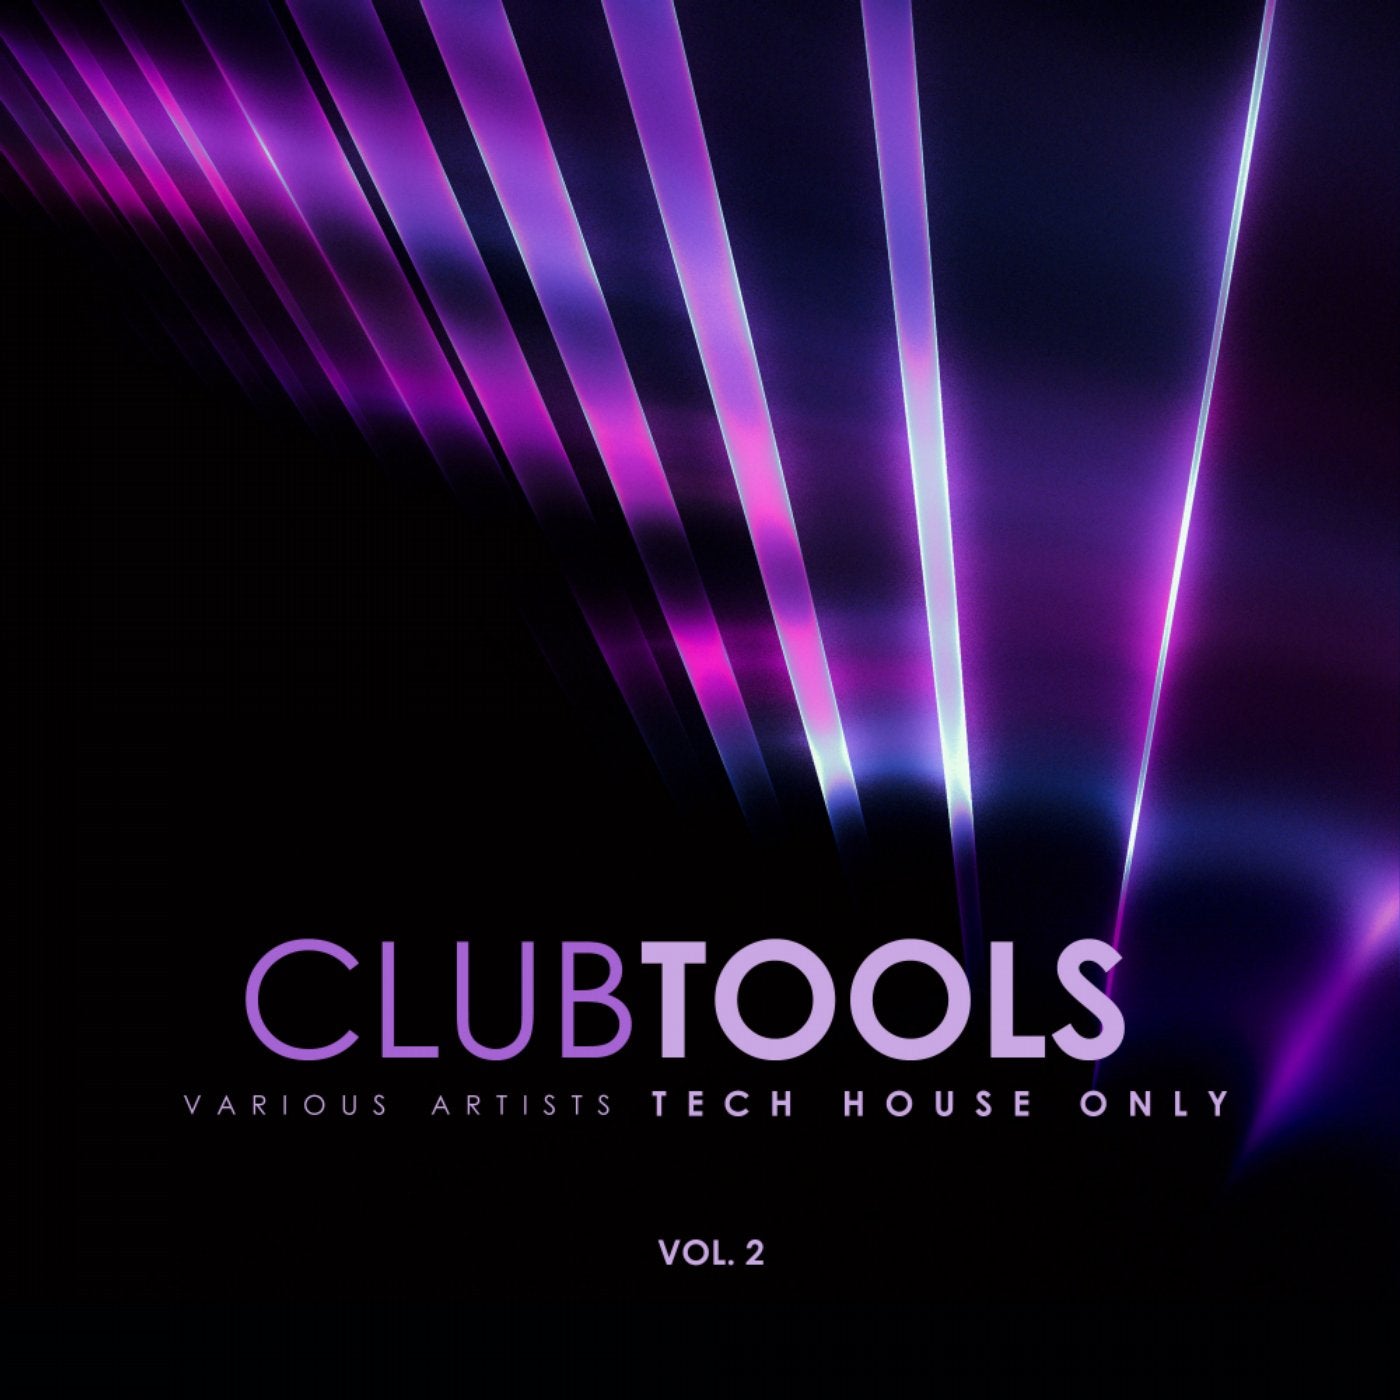 Club Tools (Tech House Only), Vol. 2